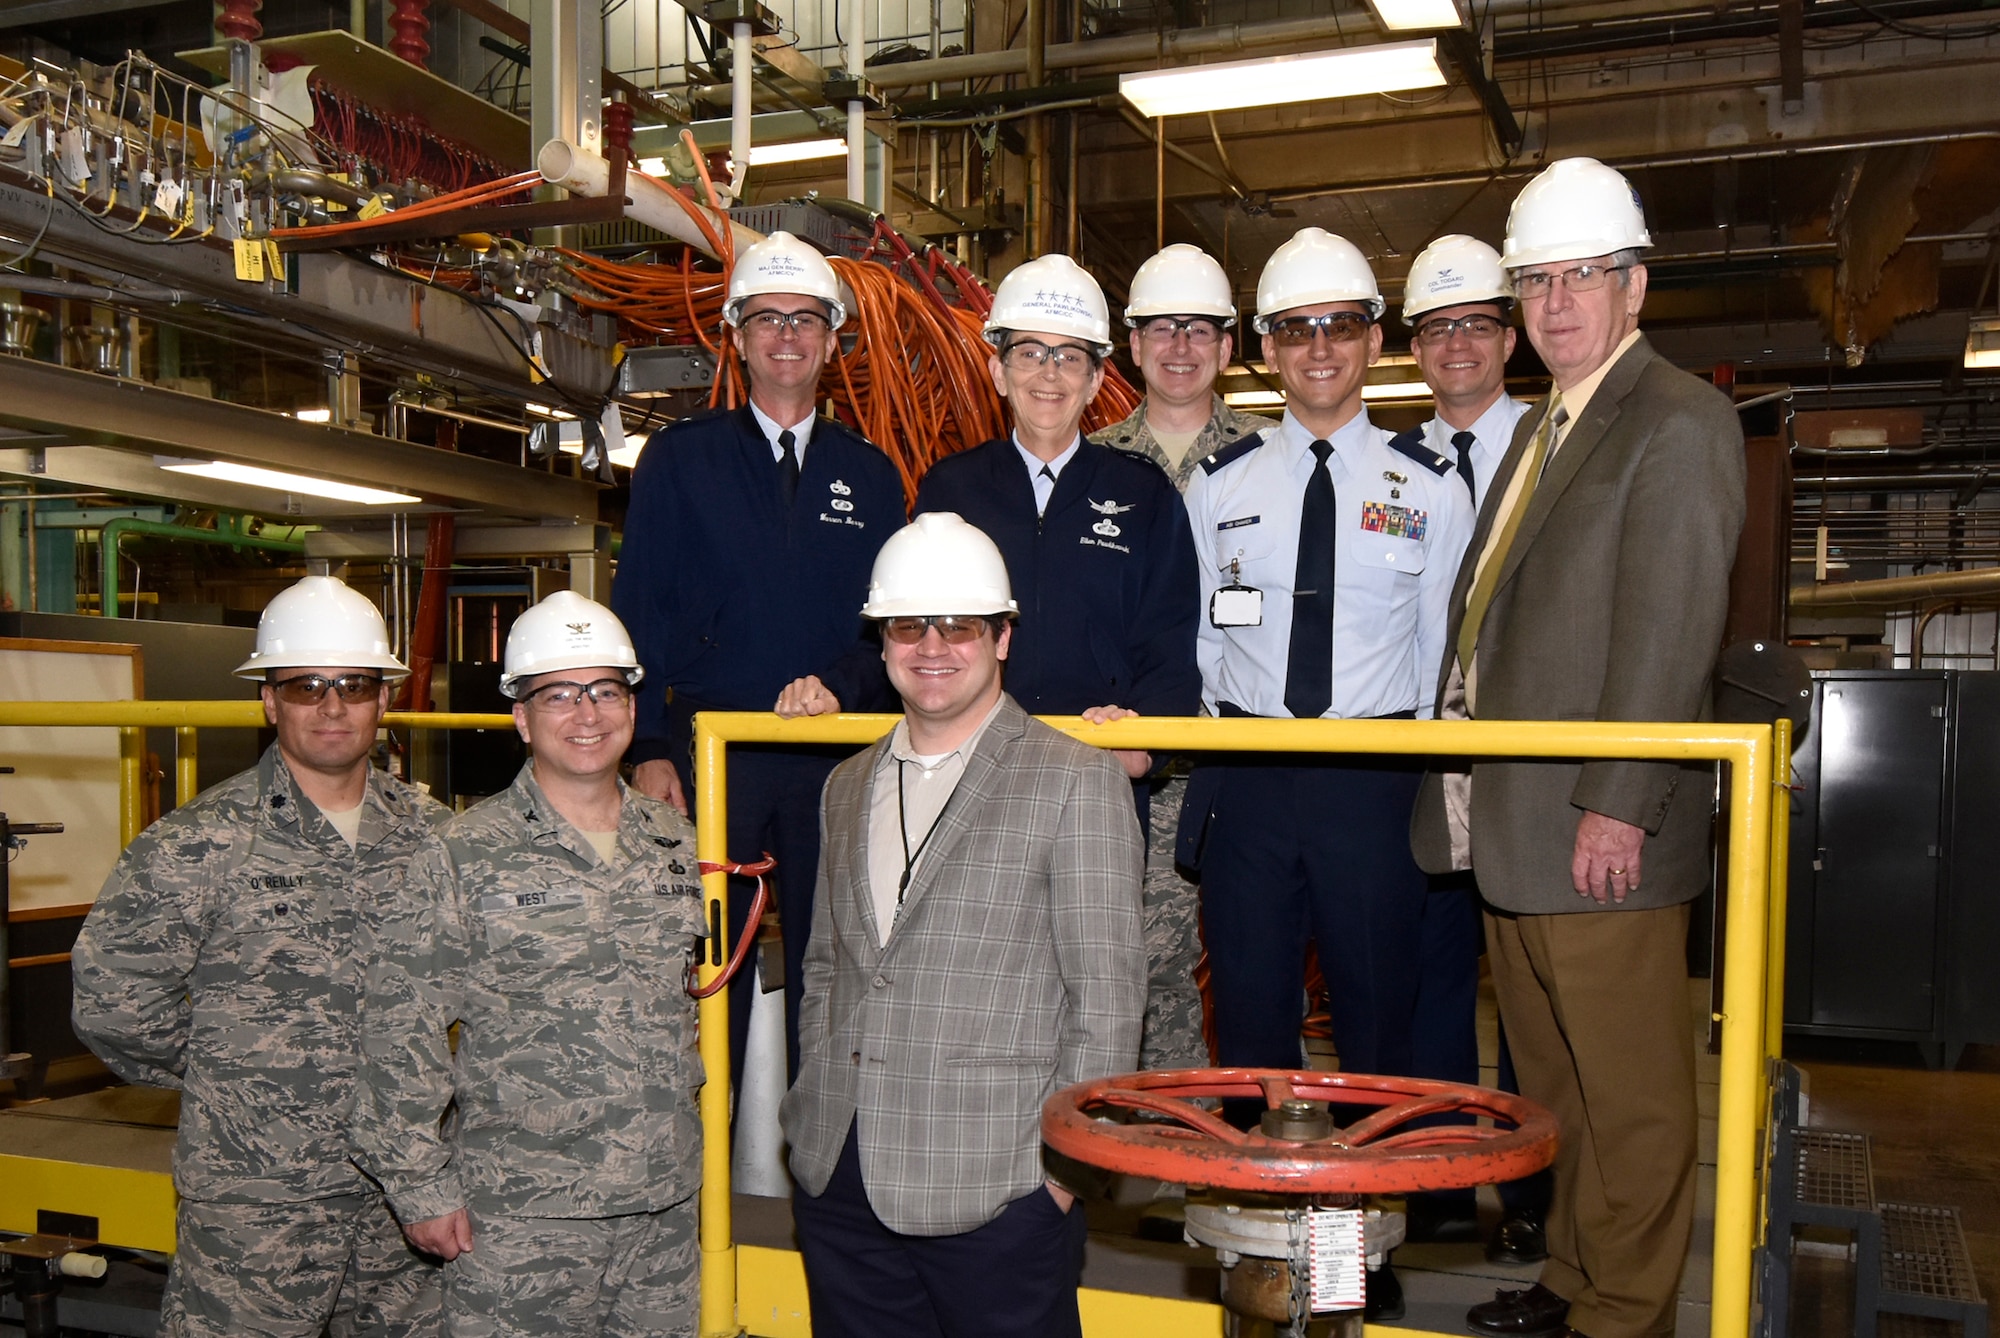 Gen. Ellen M. Pawlikowski (back row, second from left), commander of Air Force Materiel Command, pauses for a group photo while touring the AEDC Arc Heaters Test Facility Oct. 16, 2015. The facility provides high-enthalpy environments to test materials and thermal protection. Pictured in the front row from left is Lt. Col. Mark O’Reilly, AEDC Test System Sustainment Division Chief; Col. Timothy West, AEDC Test Operations Division Chief; Gary Hammock, Space and Missile Combined Test Force aerospace test engineer; back row from left: Maj. Gen. Warren D. Berry, AFMC vice commander; Pawlikowski; Lt. Col. Jason Armstrong, Space and Missile CTF director; 1st Lt. Zahi Abi Chaker, AEDC Command Executive Officer; Col. Rodney Todaro, commander of AEDC; and Dr. Edward Kraft, AEDC Chief Technologist. (U.S. Air Force photo/Jacqueline Cowan)